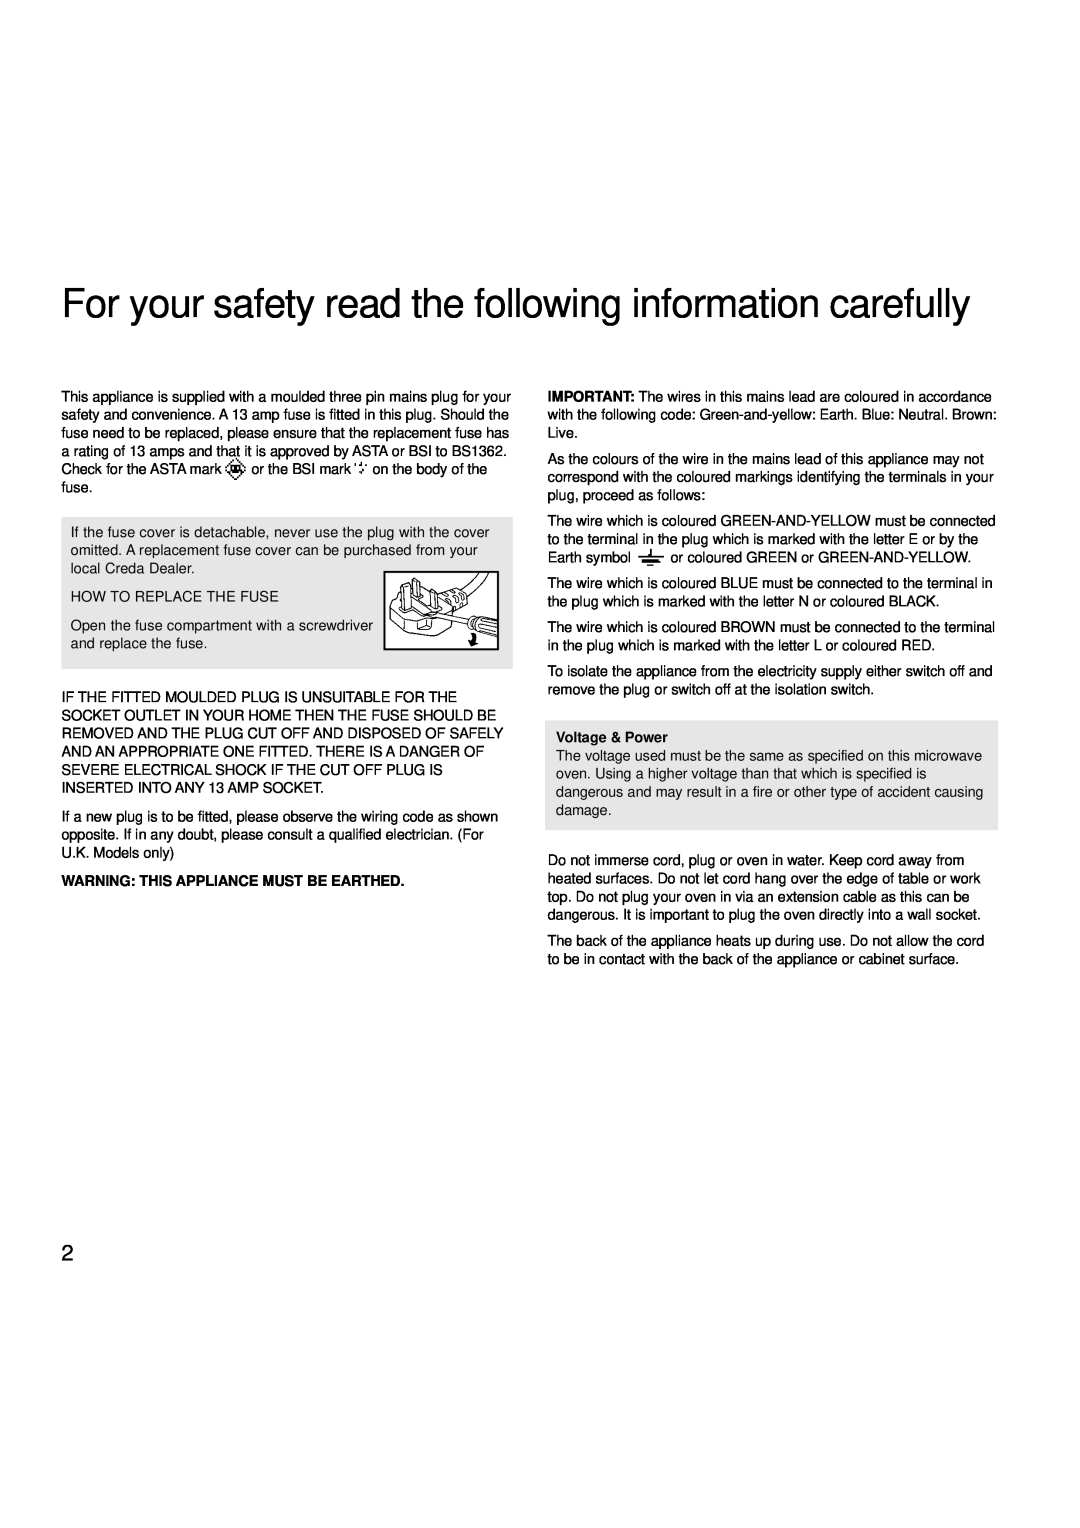 Creda MBO55 manual For your safety read the following information carefully, Warning This Appliance Must Be Earthed 